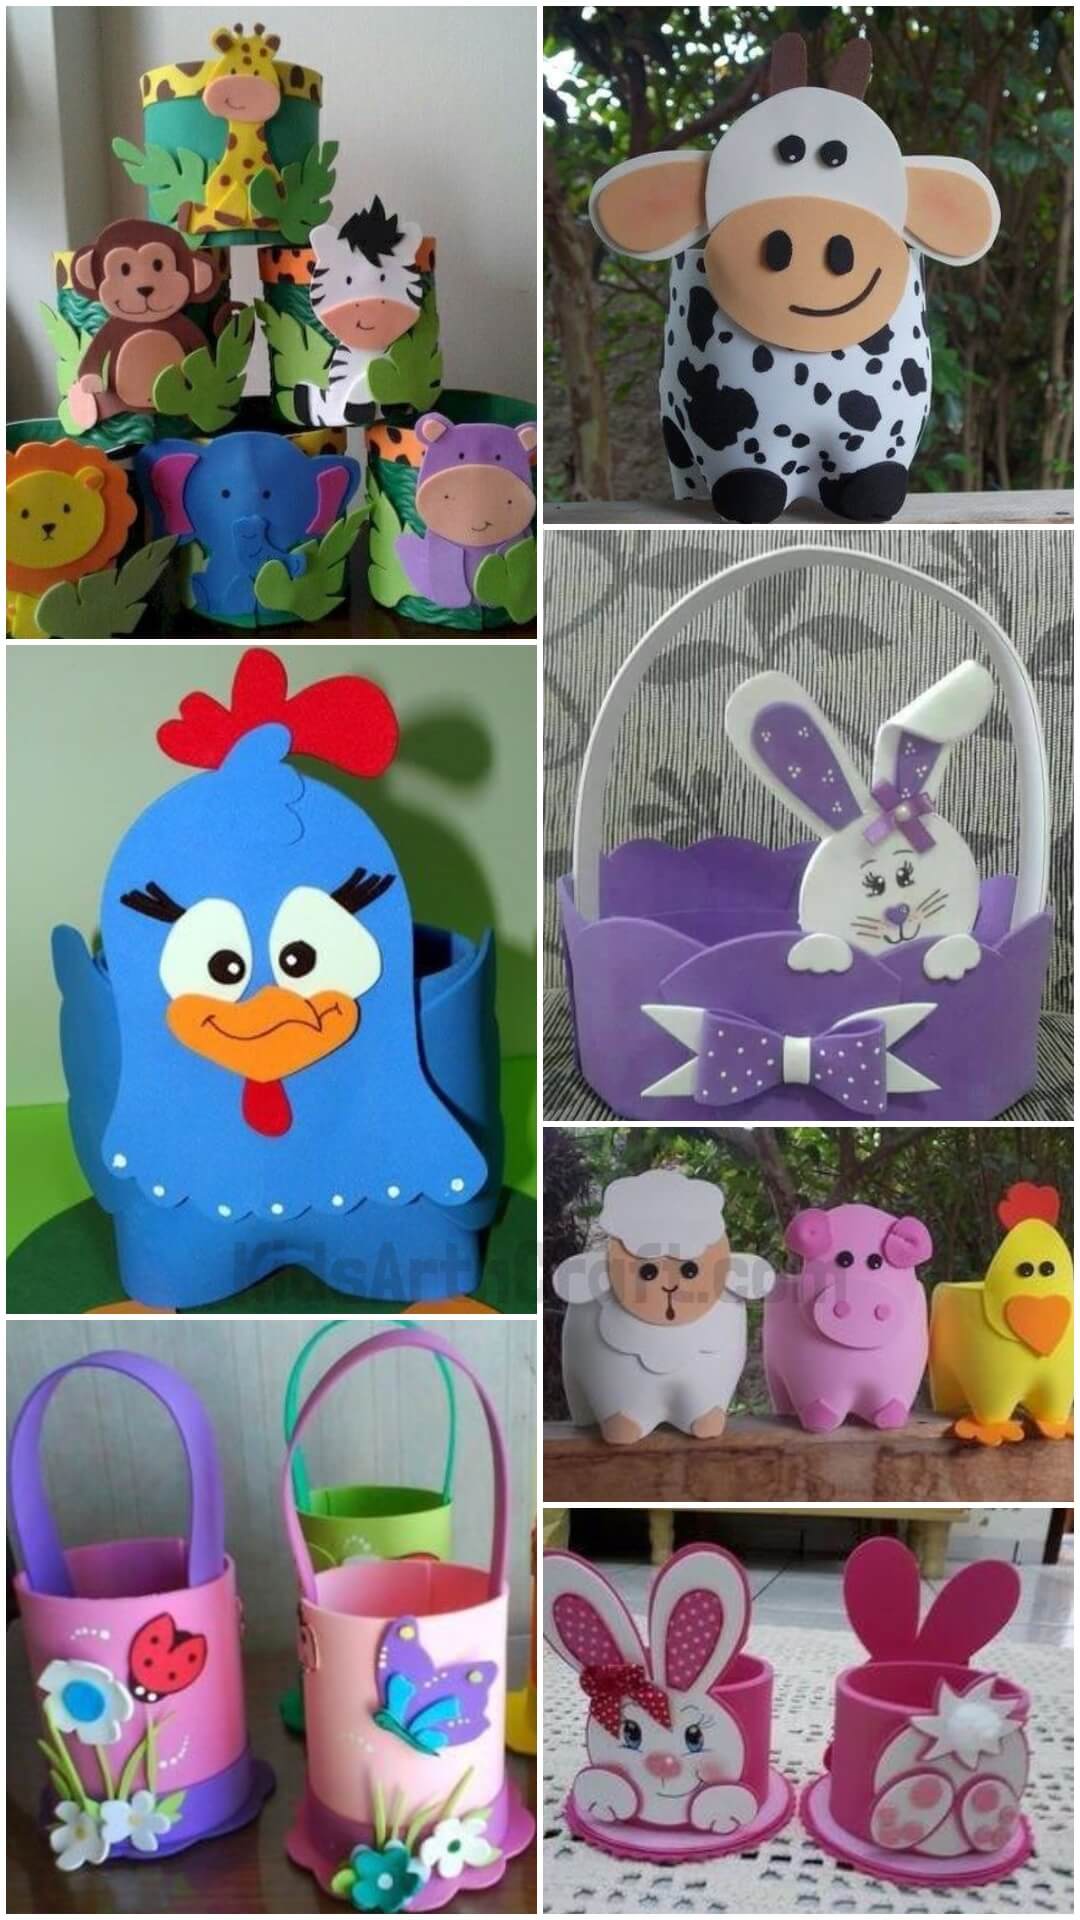 Foam Craft Ideas for Kids to Make at Home